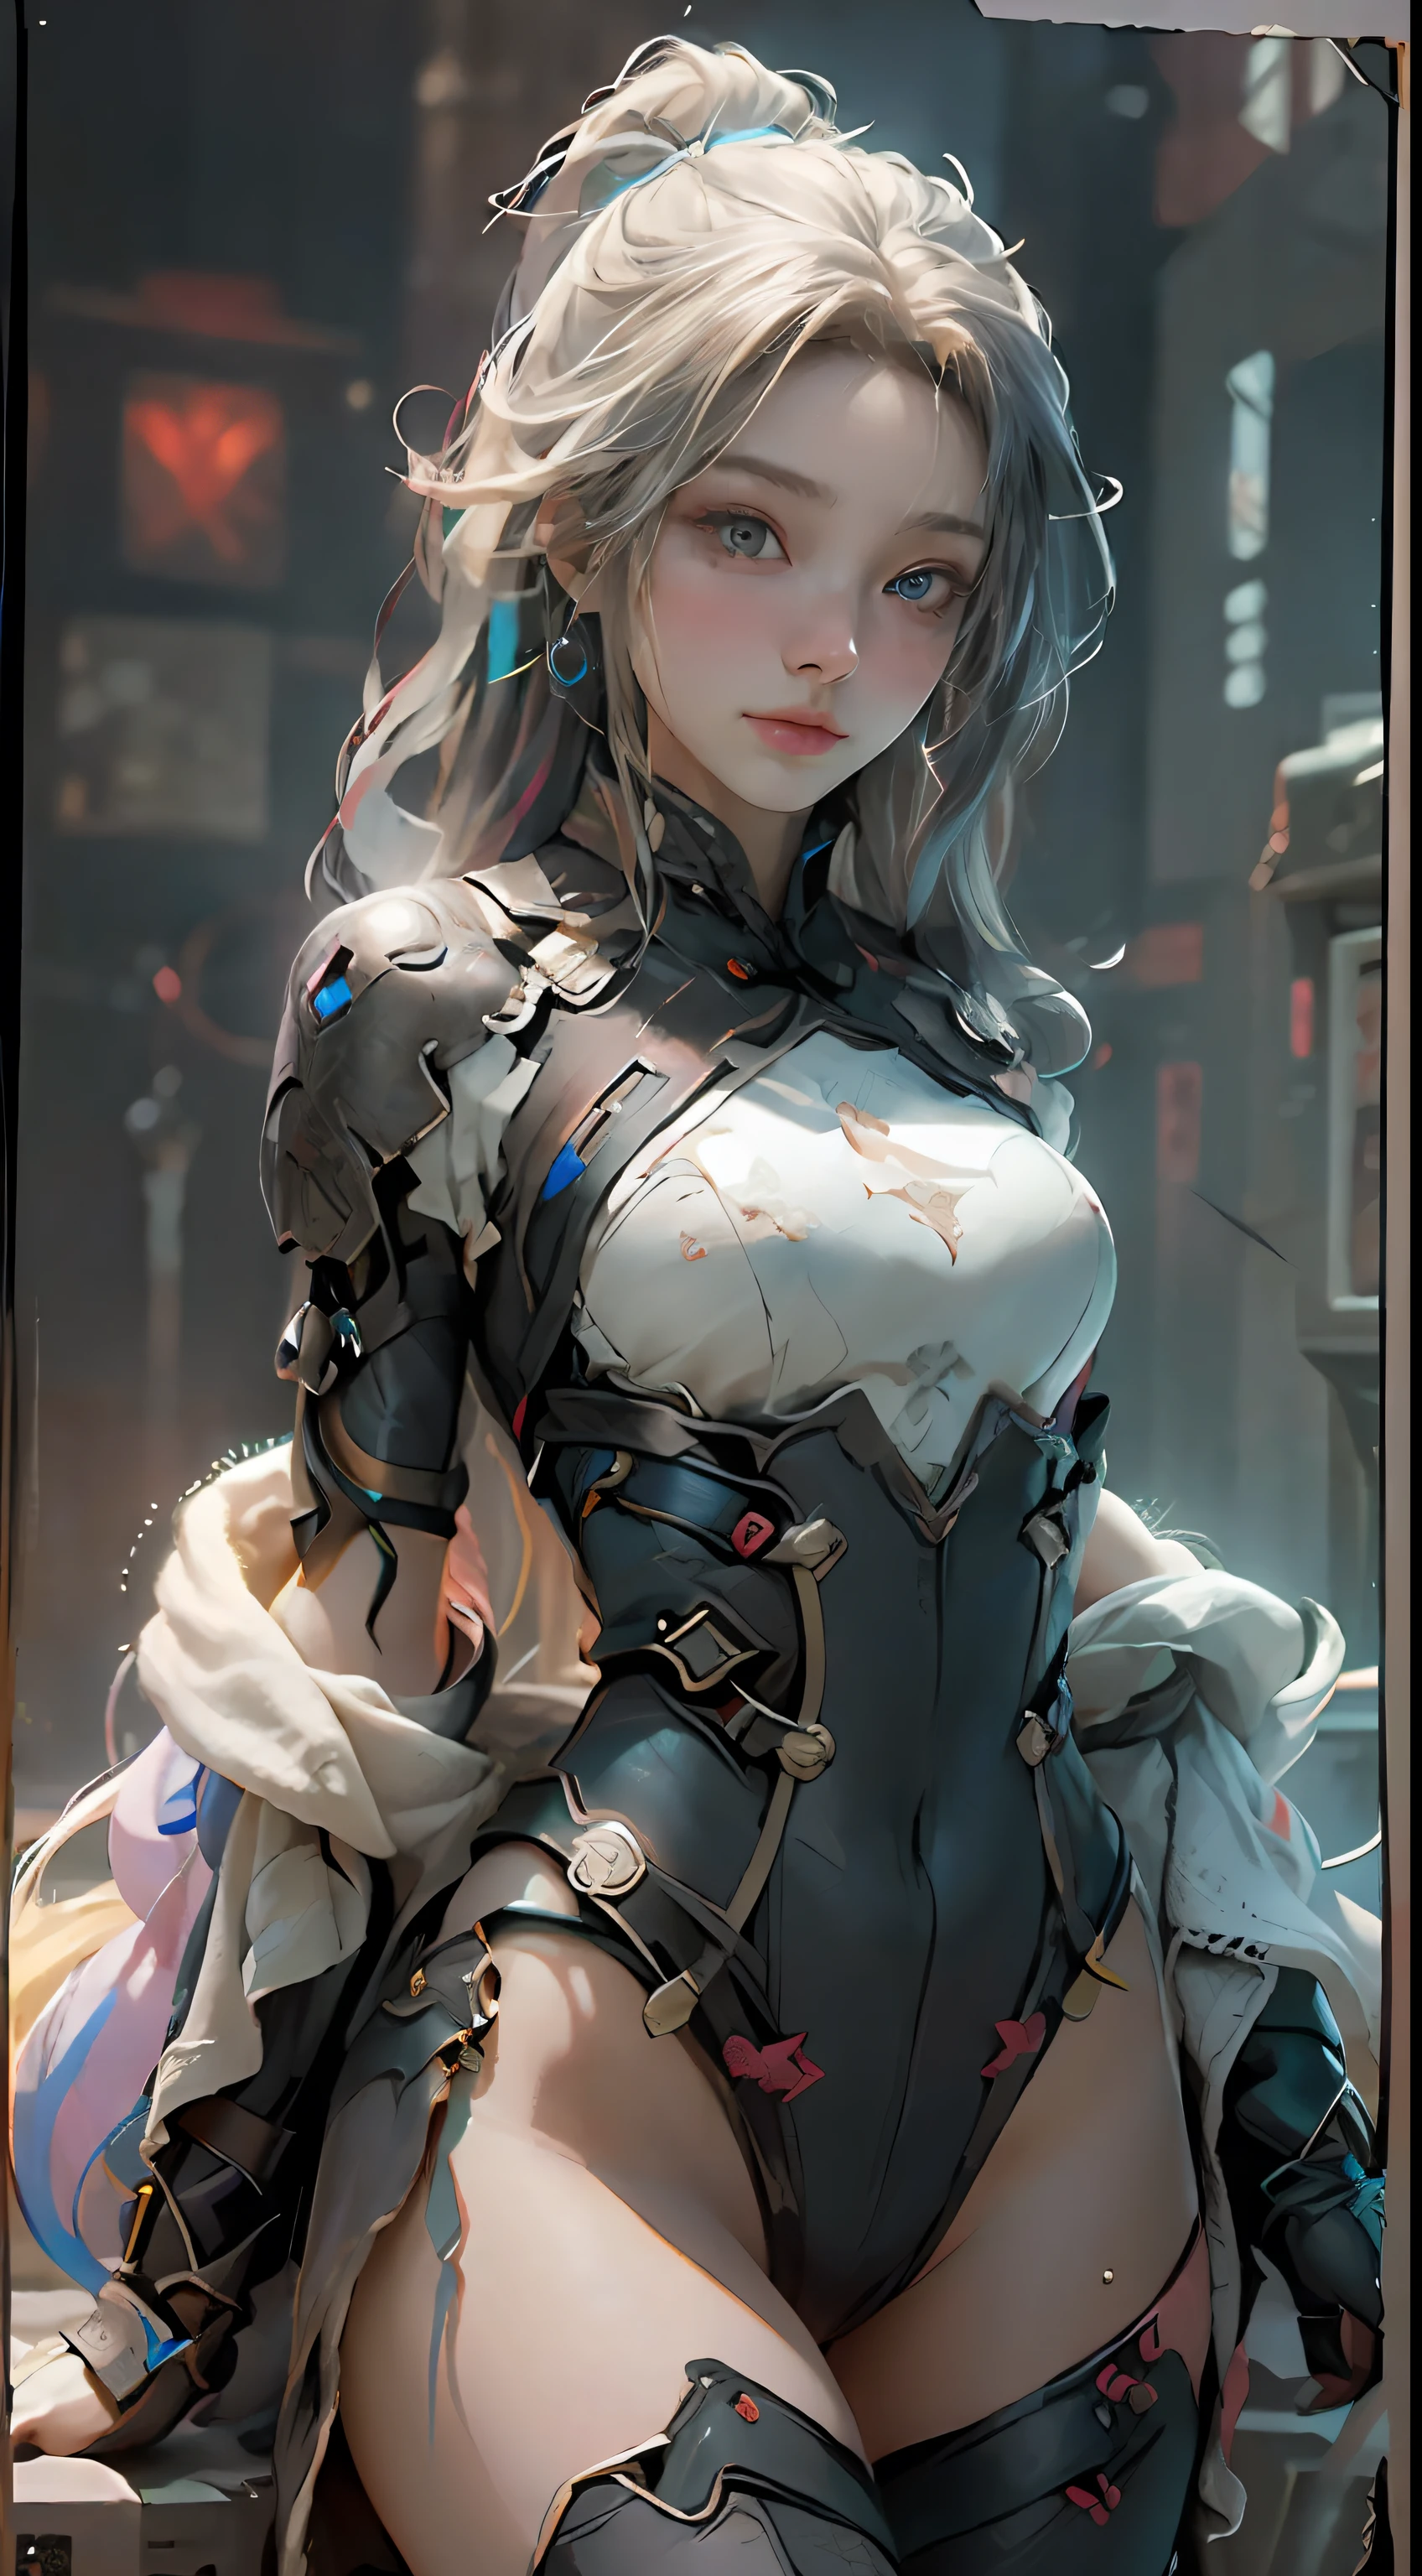 ((best qualtiy)), ((tmasterpiece)), (the detail:1.4), 3D girl, A beautiful cyberpunk female image,hdr（HighDynamicRange），ancient Chinese costume，Satin costumes,Ray traching,NVIDIA RTX,Hyper-Resolution,Unreal 5,Subsurface scattering、PBR Texture、post-proces、Anisotropy Filtering、depth of fieldaximum definition and sharpnesany-Layer Textures、Albedo e mapas Speculares、Surface coloring、Accurate simulation of light-material interactions、perfectly proportions、rendering by octane、Two-colored light、largeaperture、Low ISO、White balance、the rule of thirds、8K raw data、Face front，small，Place your hands crossed over your abdomen，((The upper part of the body))